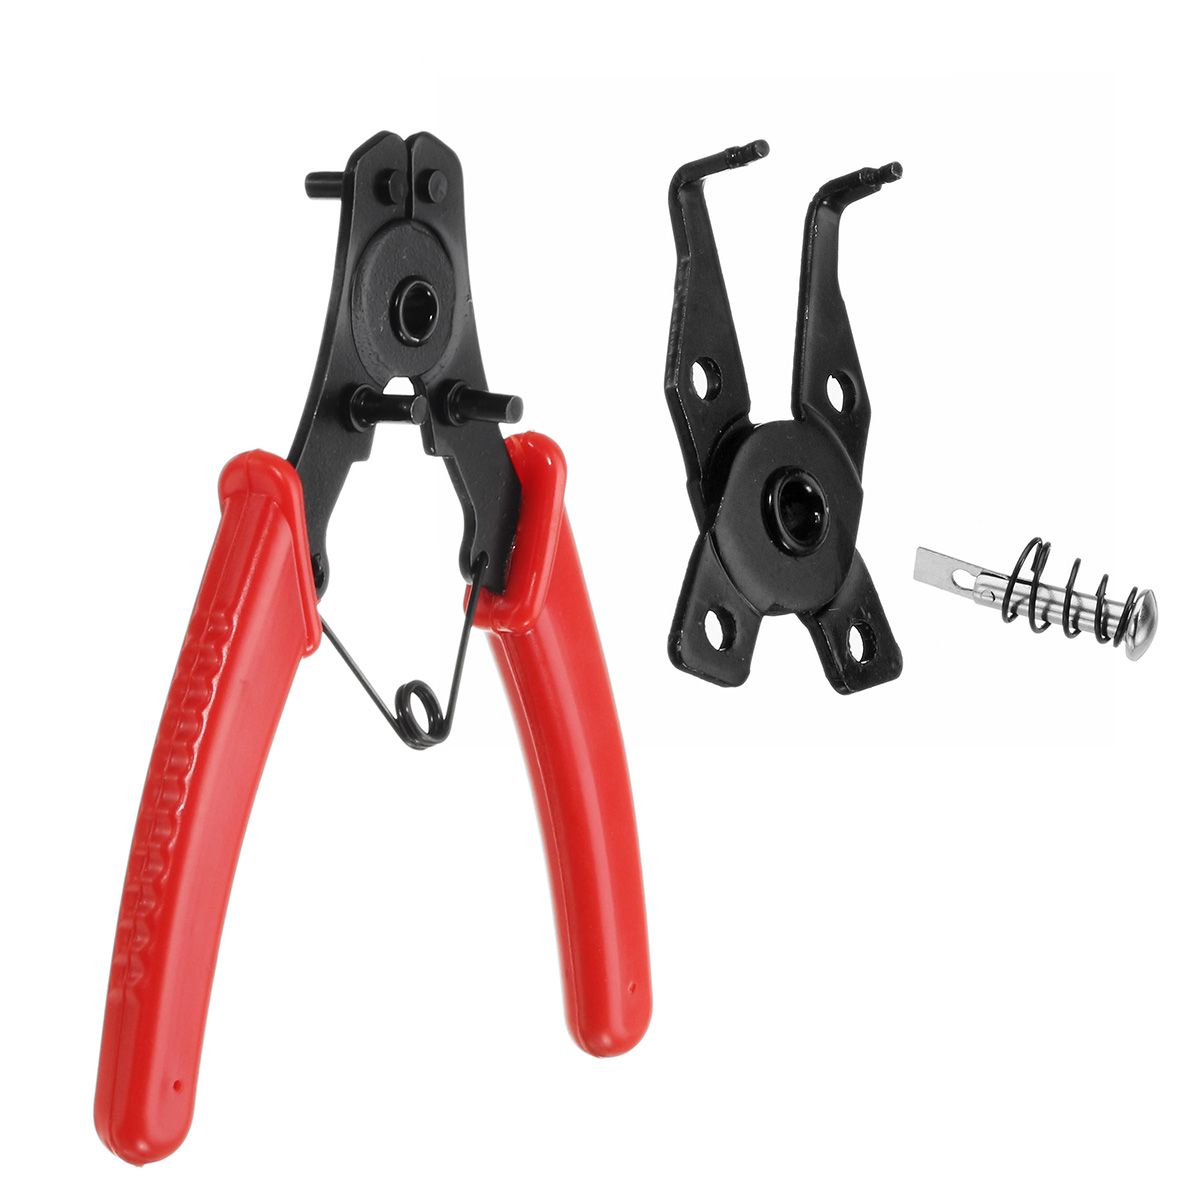 3-in-1-Circlip-Snap-Ring-Pliers-Fastener-Shaft-Used-Spring-Disassembly-Puller-Springs-Tool-Set-1402421